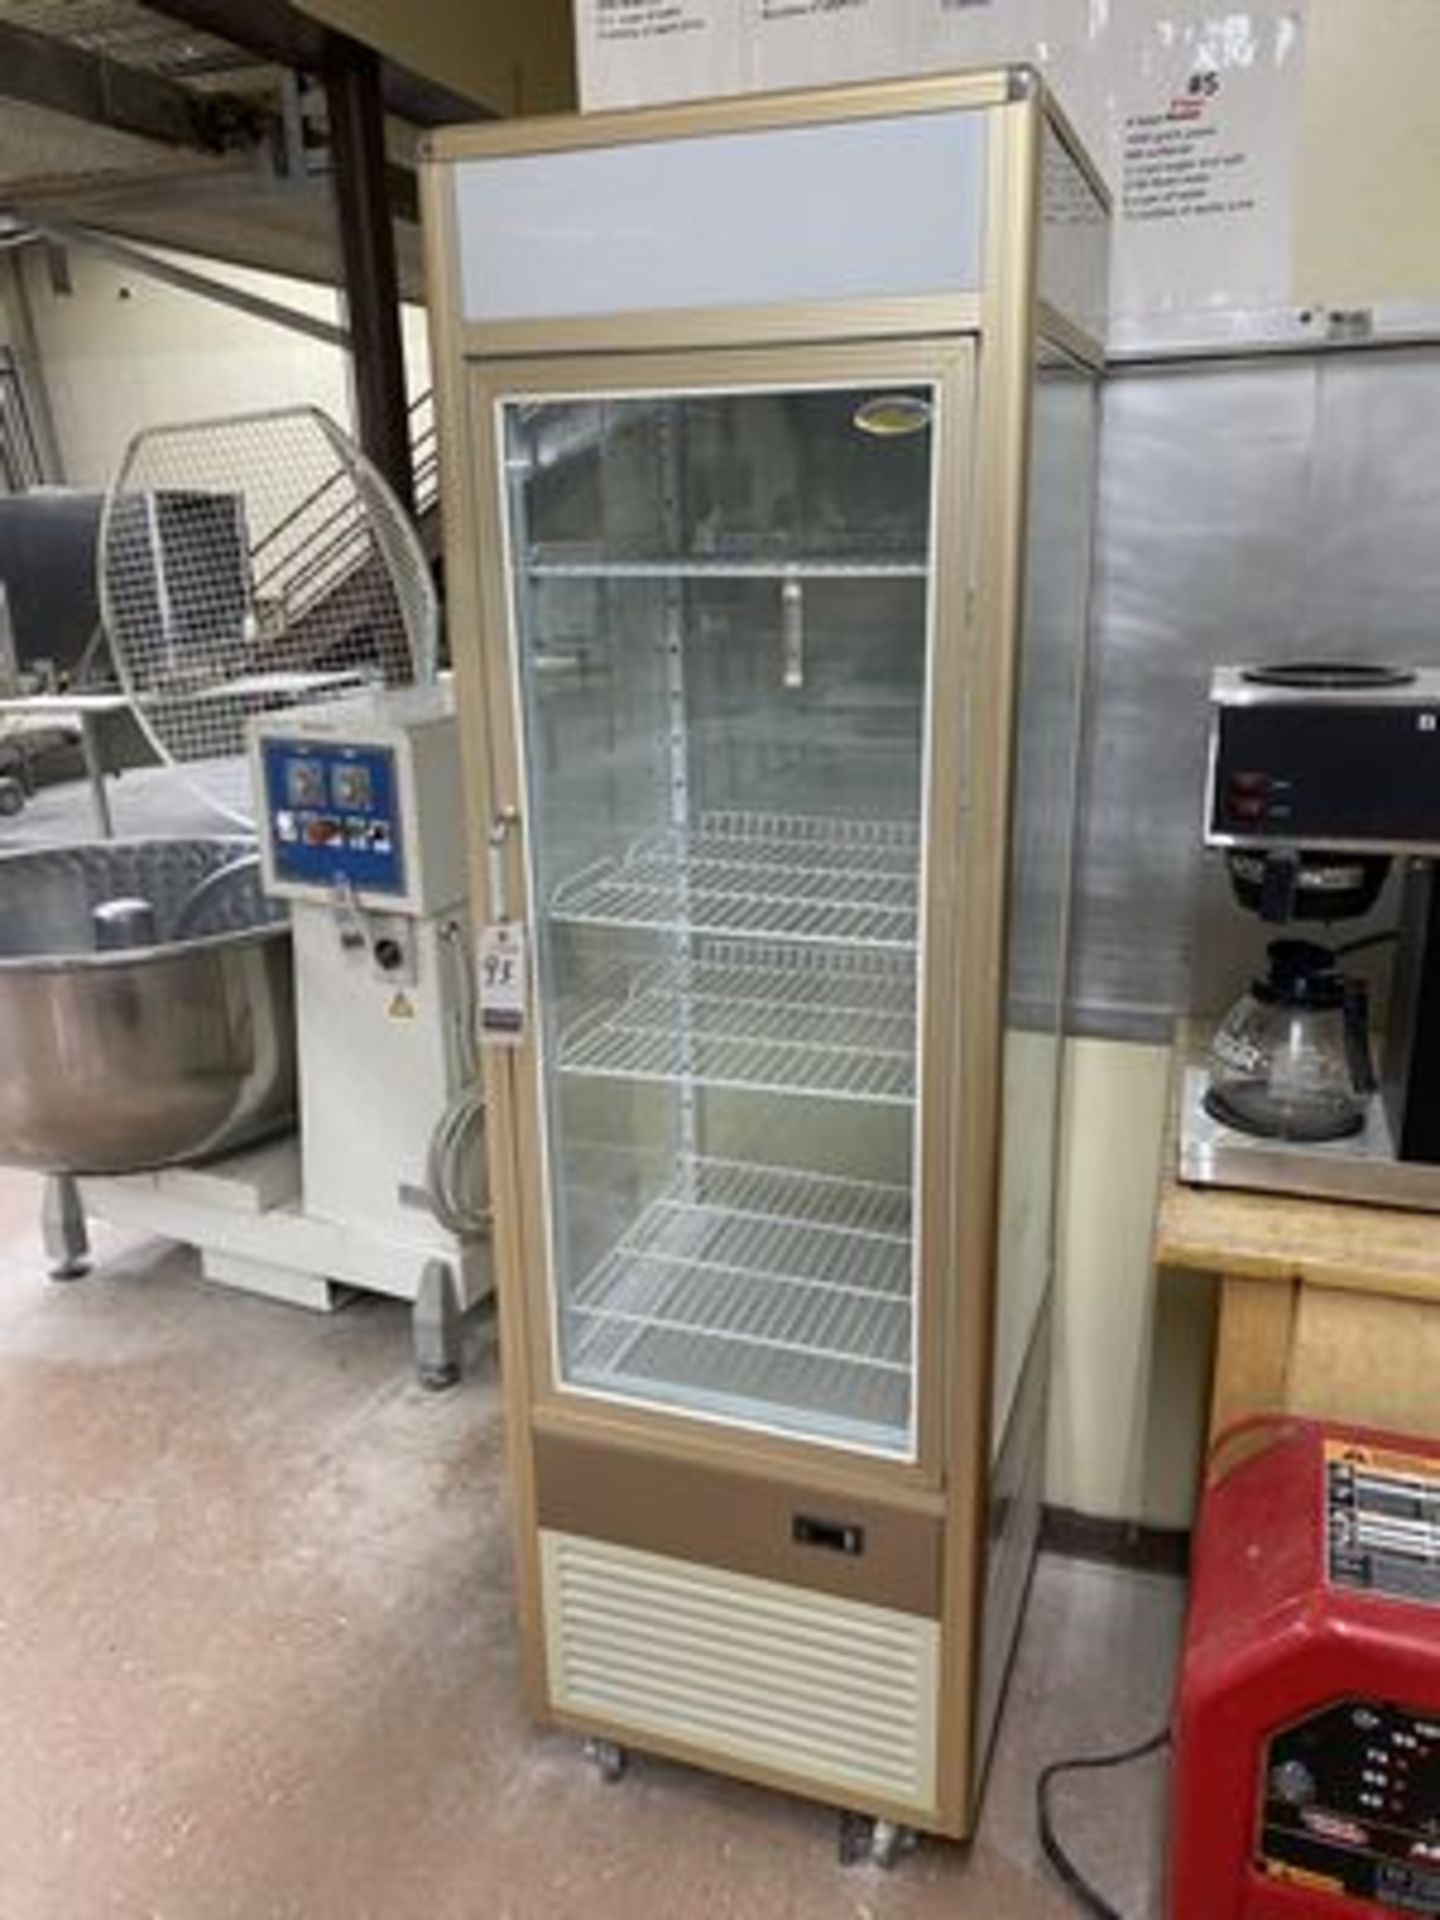 EXCELLENCE VERT. PORT. 1-GLASS DOOR COLD STORAGE PASTRY DISPLAY CAB., 1 PH., M/N FG-12